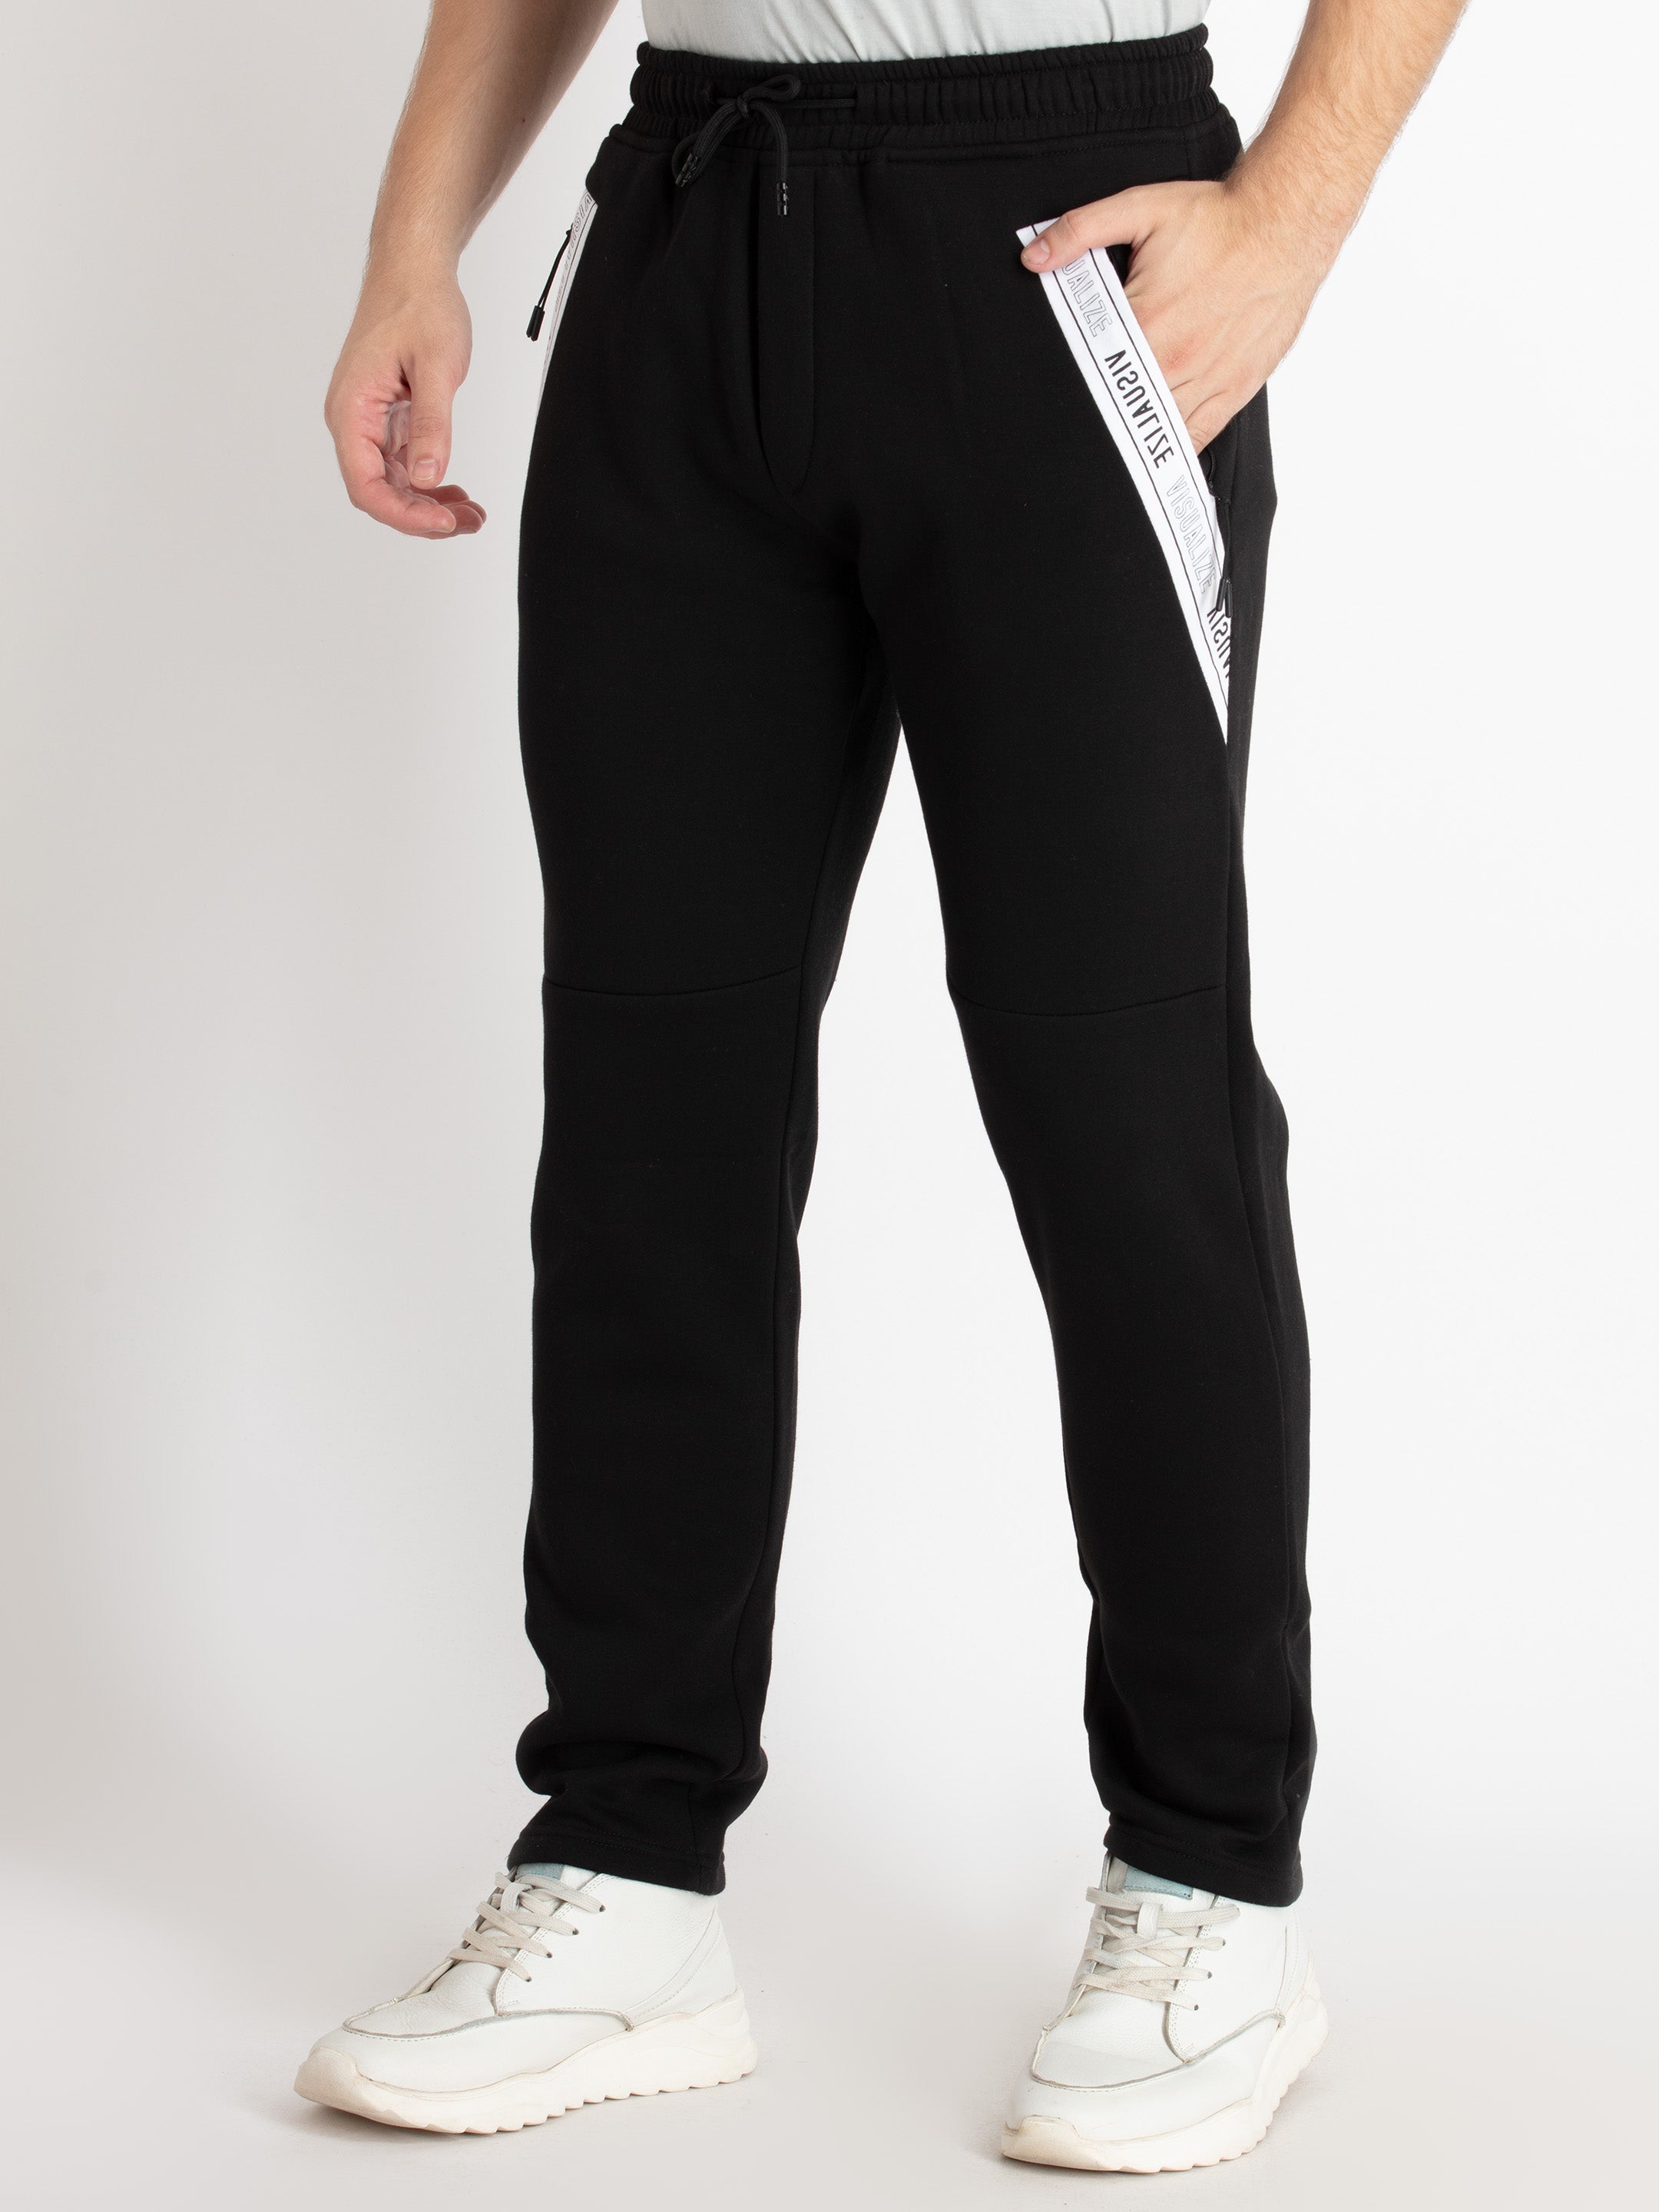 Adidas Pants Men XS Black White Striped Spell Out Track Pants Athletic Zip  Ankle | eBay